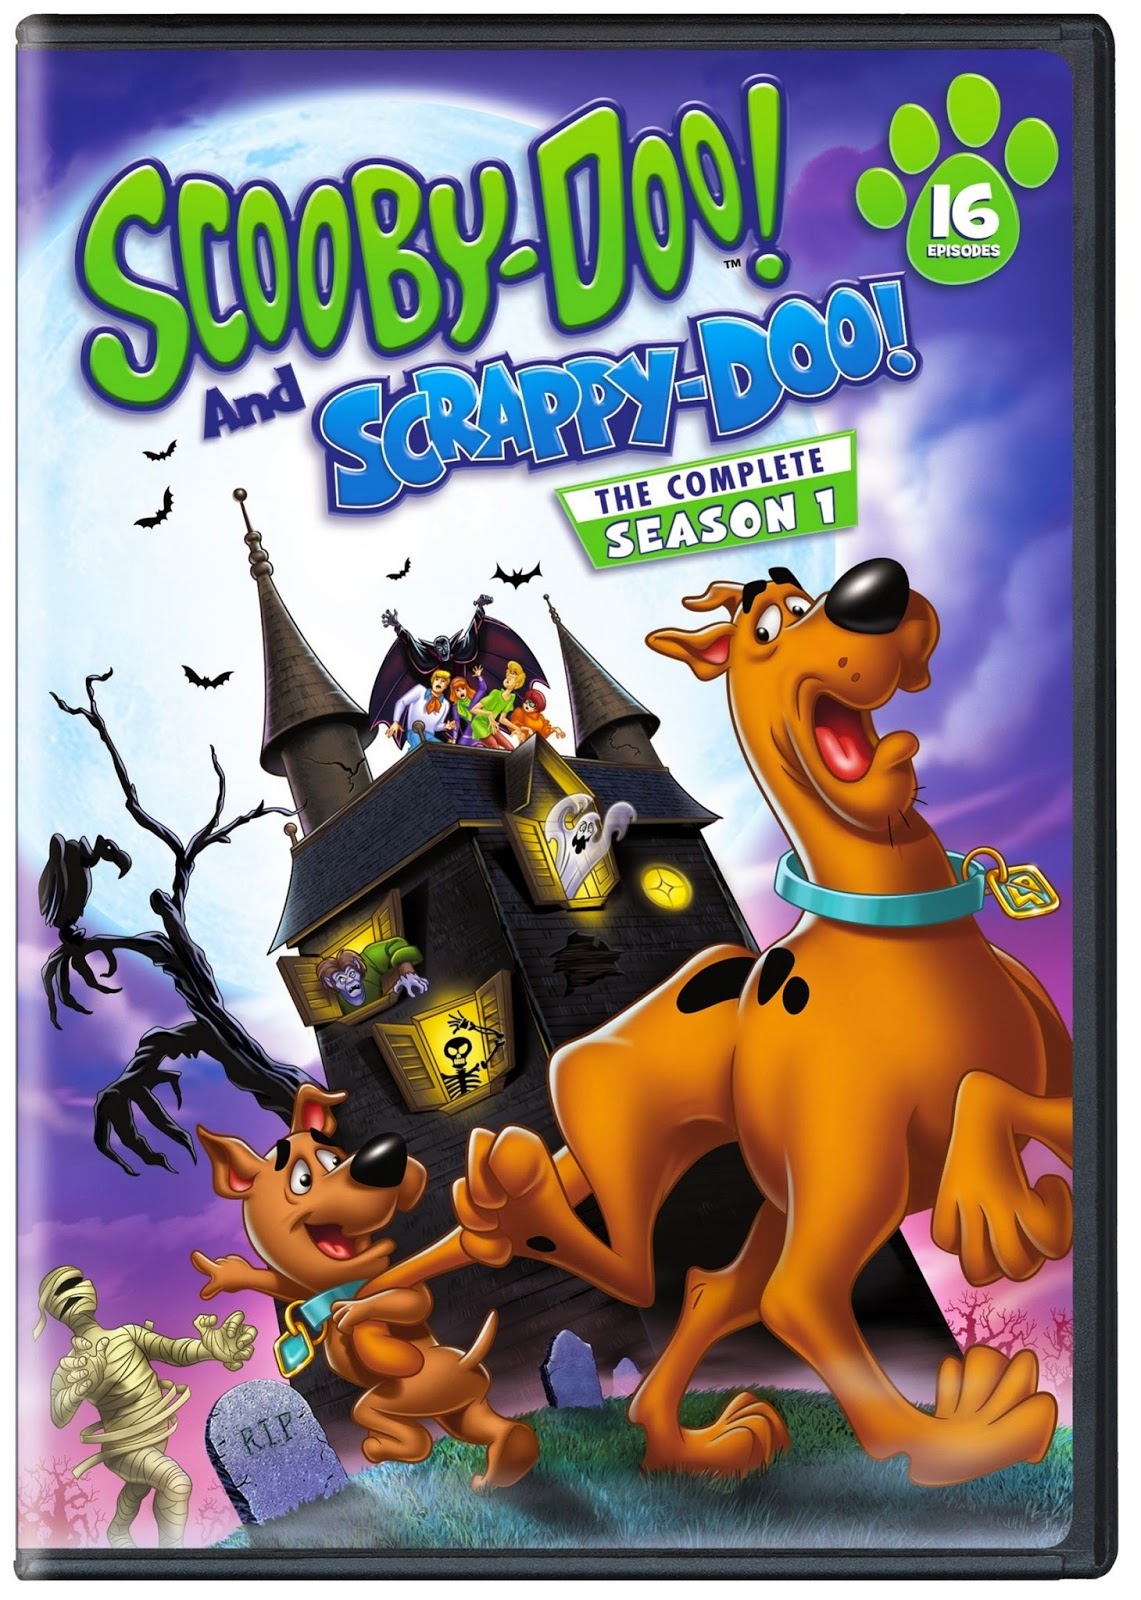 Fangirl Review: Scooby-Doo! and Scrappy-Doo!: The Complete Season 1 DVD